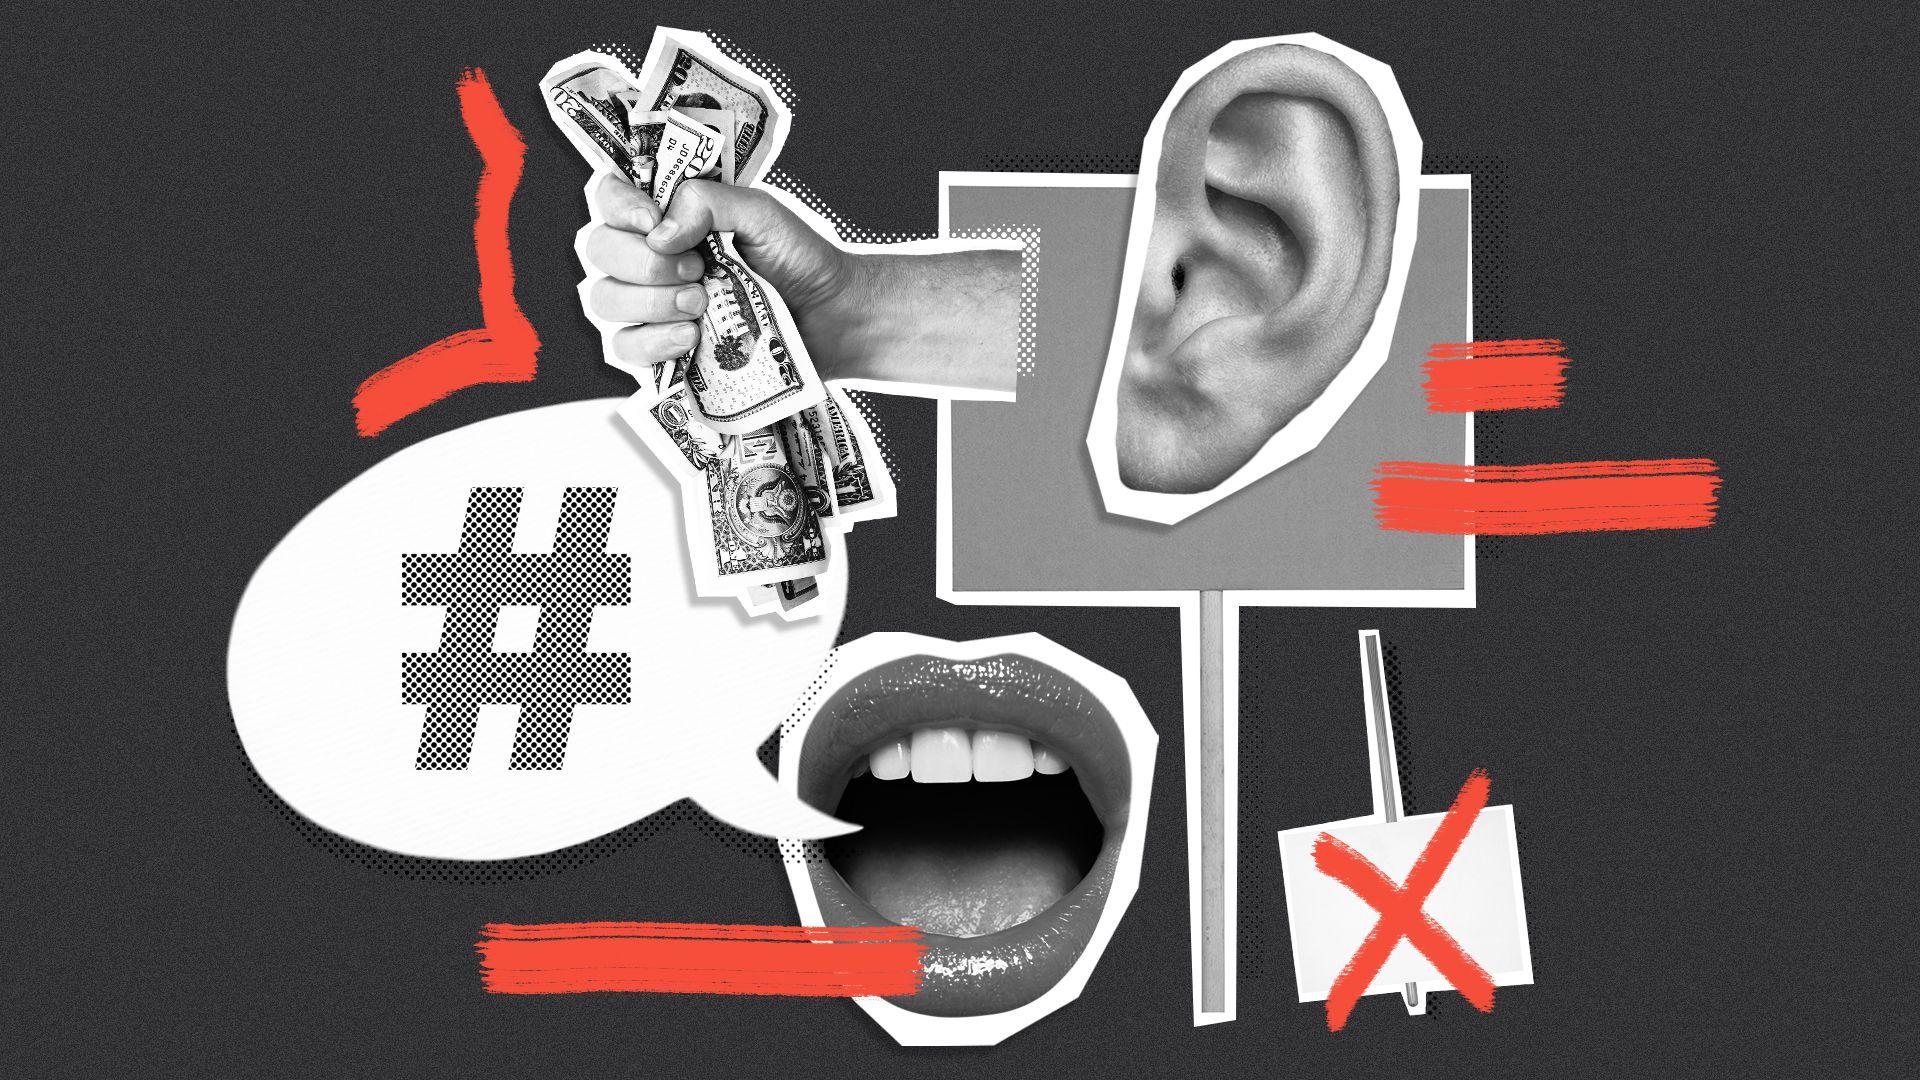 Illustrated collage of a mouth, hand holding money, picket signs, ear and speech bubble with hashtag.